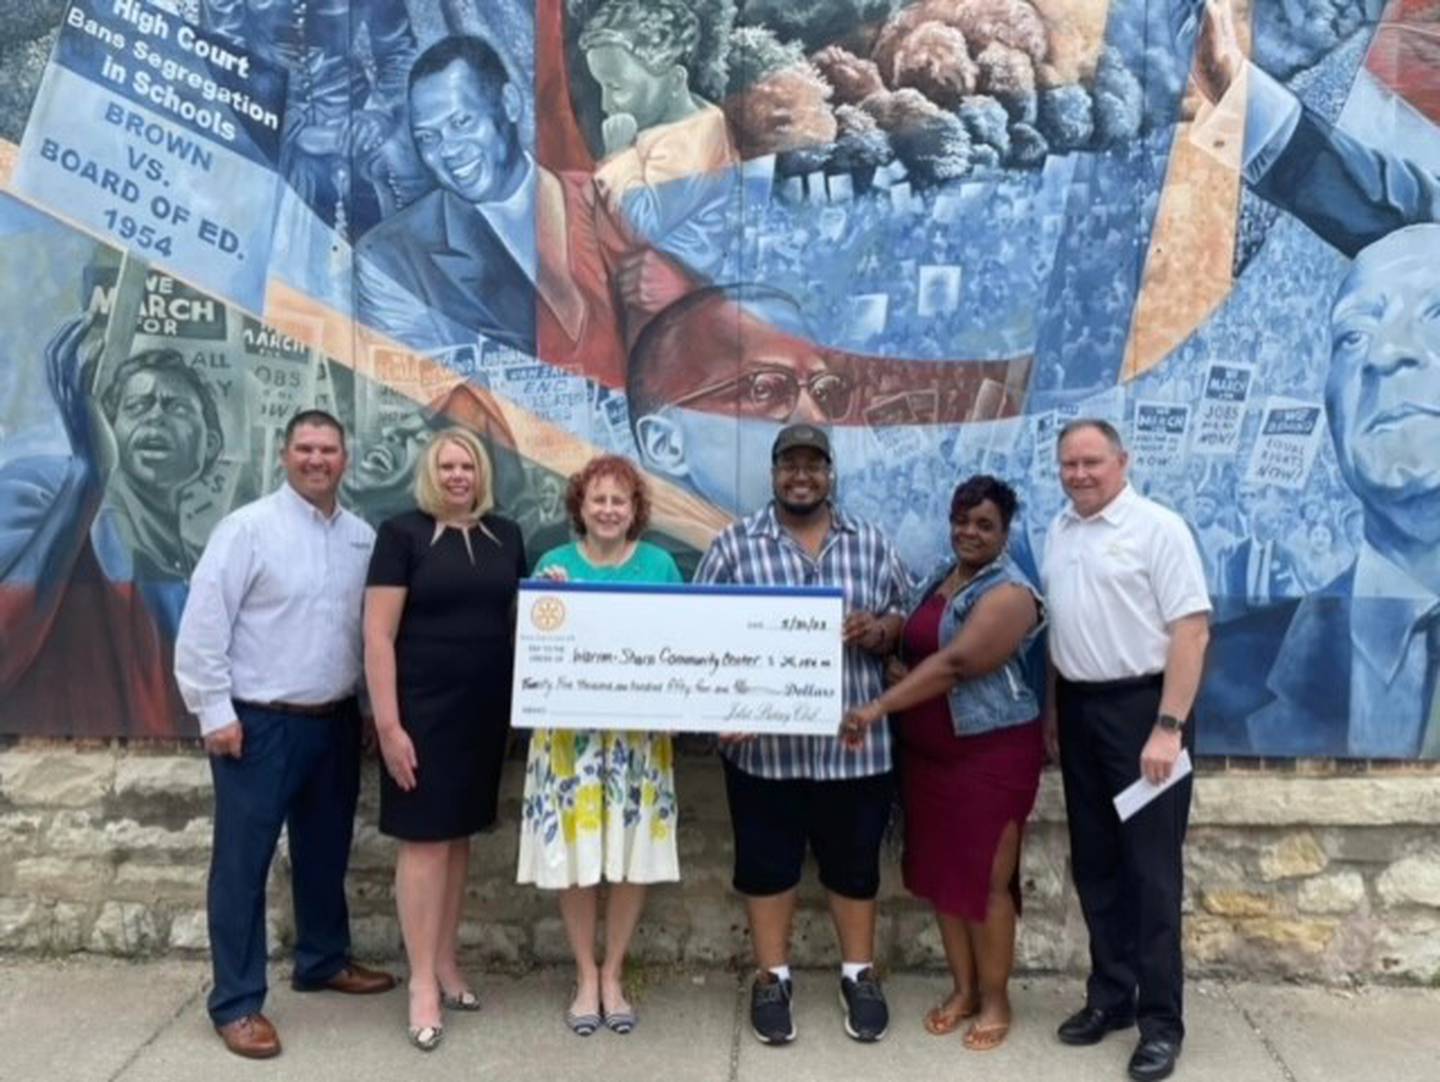 The Rotary Club of Joliet donated this year's raffle proceeds to the Warren Sharpe Community Center in Joliet. Pictured (from left) are Marc Gorsch, Tracy Simons, Mary Sheehan, Jeremy Bolden (executive director of Warren Sharpe), Daphne Payton (from Warren Sharpe) and Brian Cedergren.